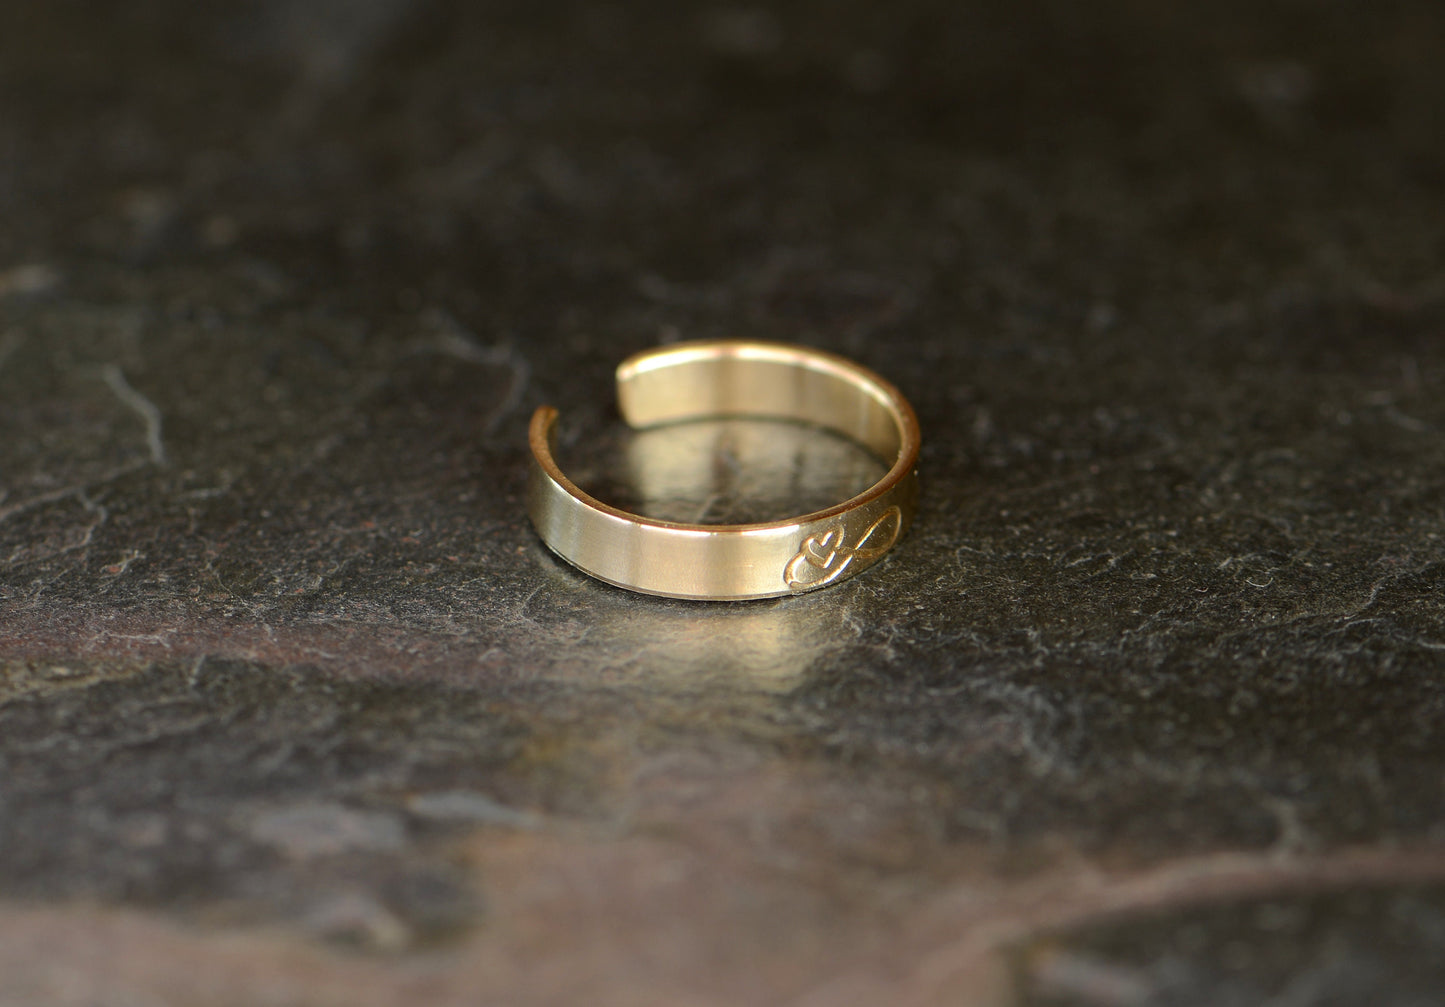 Dainty 14k gold toe ring with infinity and heart - dainty and solid gold